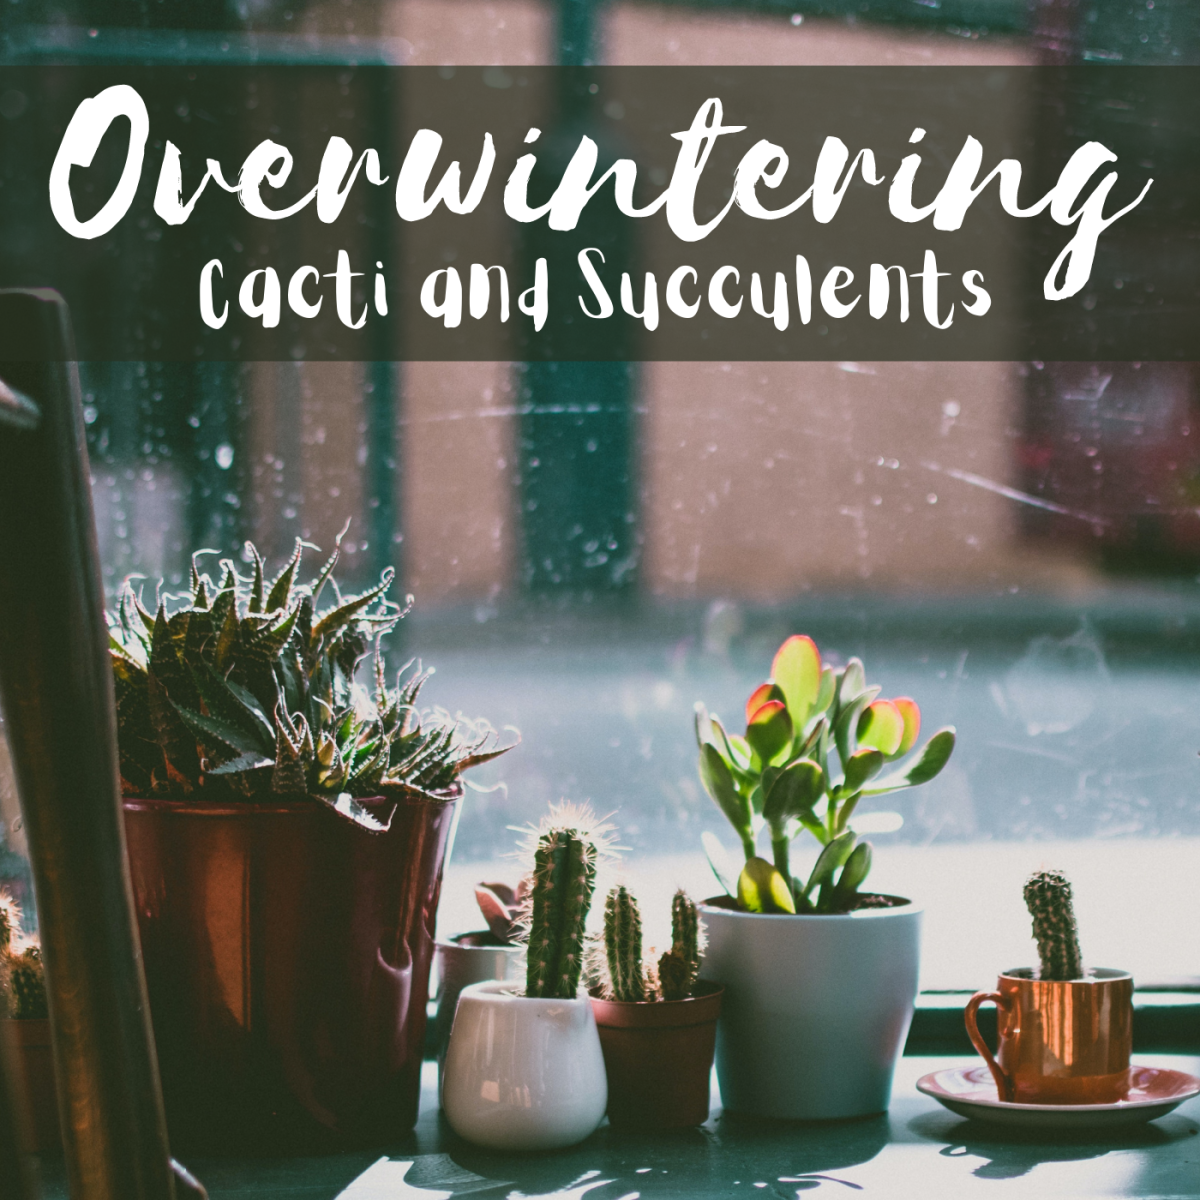 Overwintering cacti and succulents